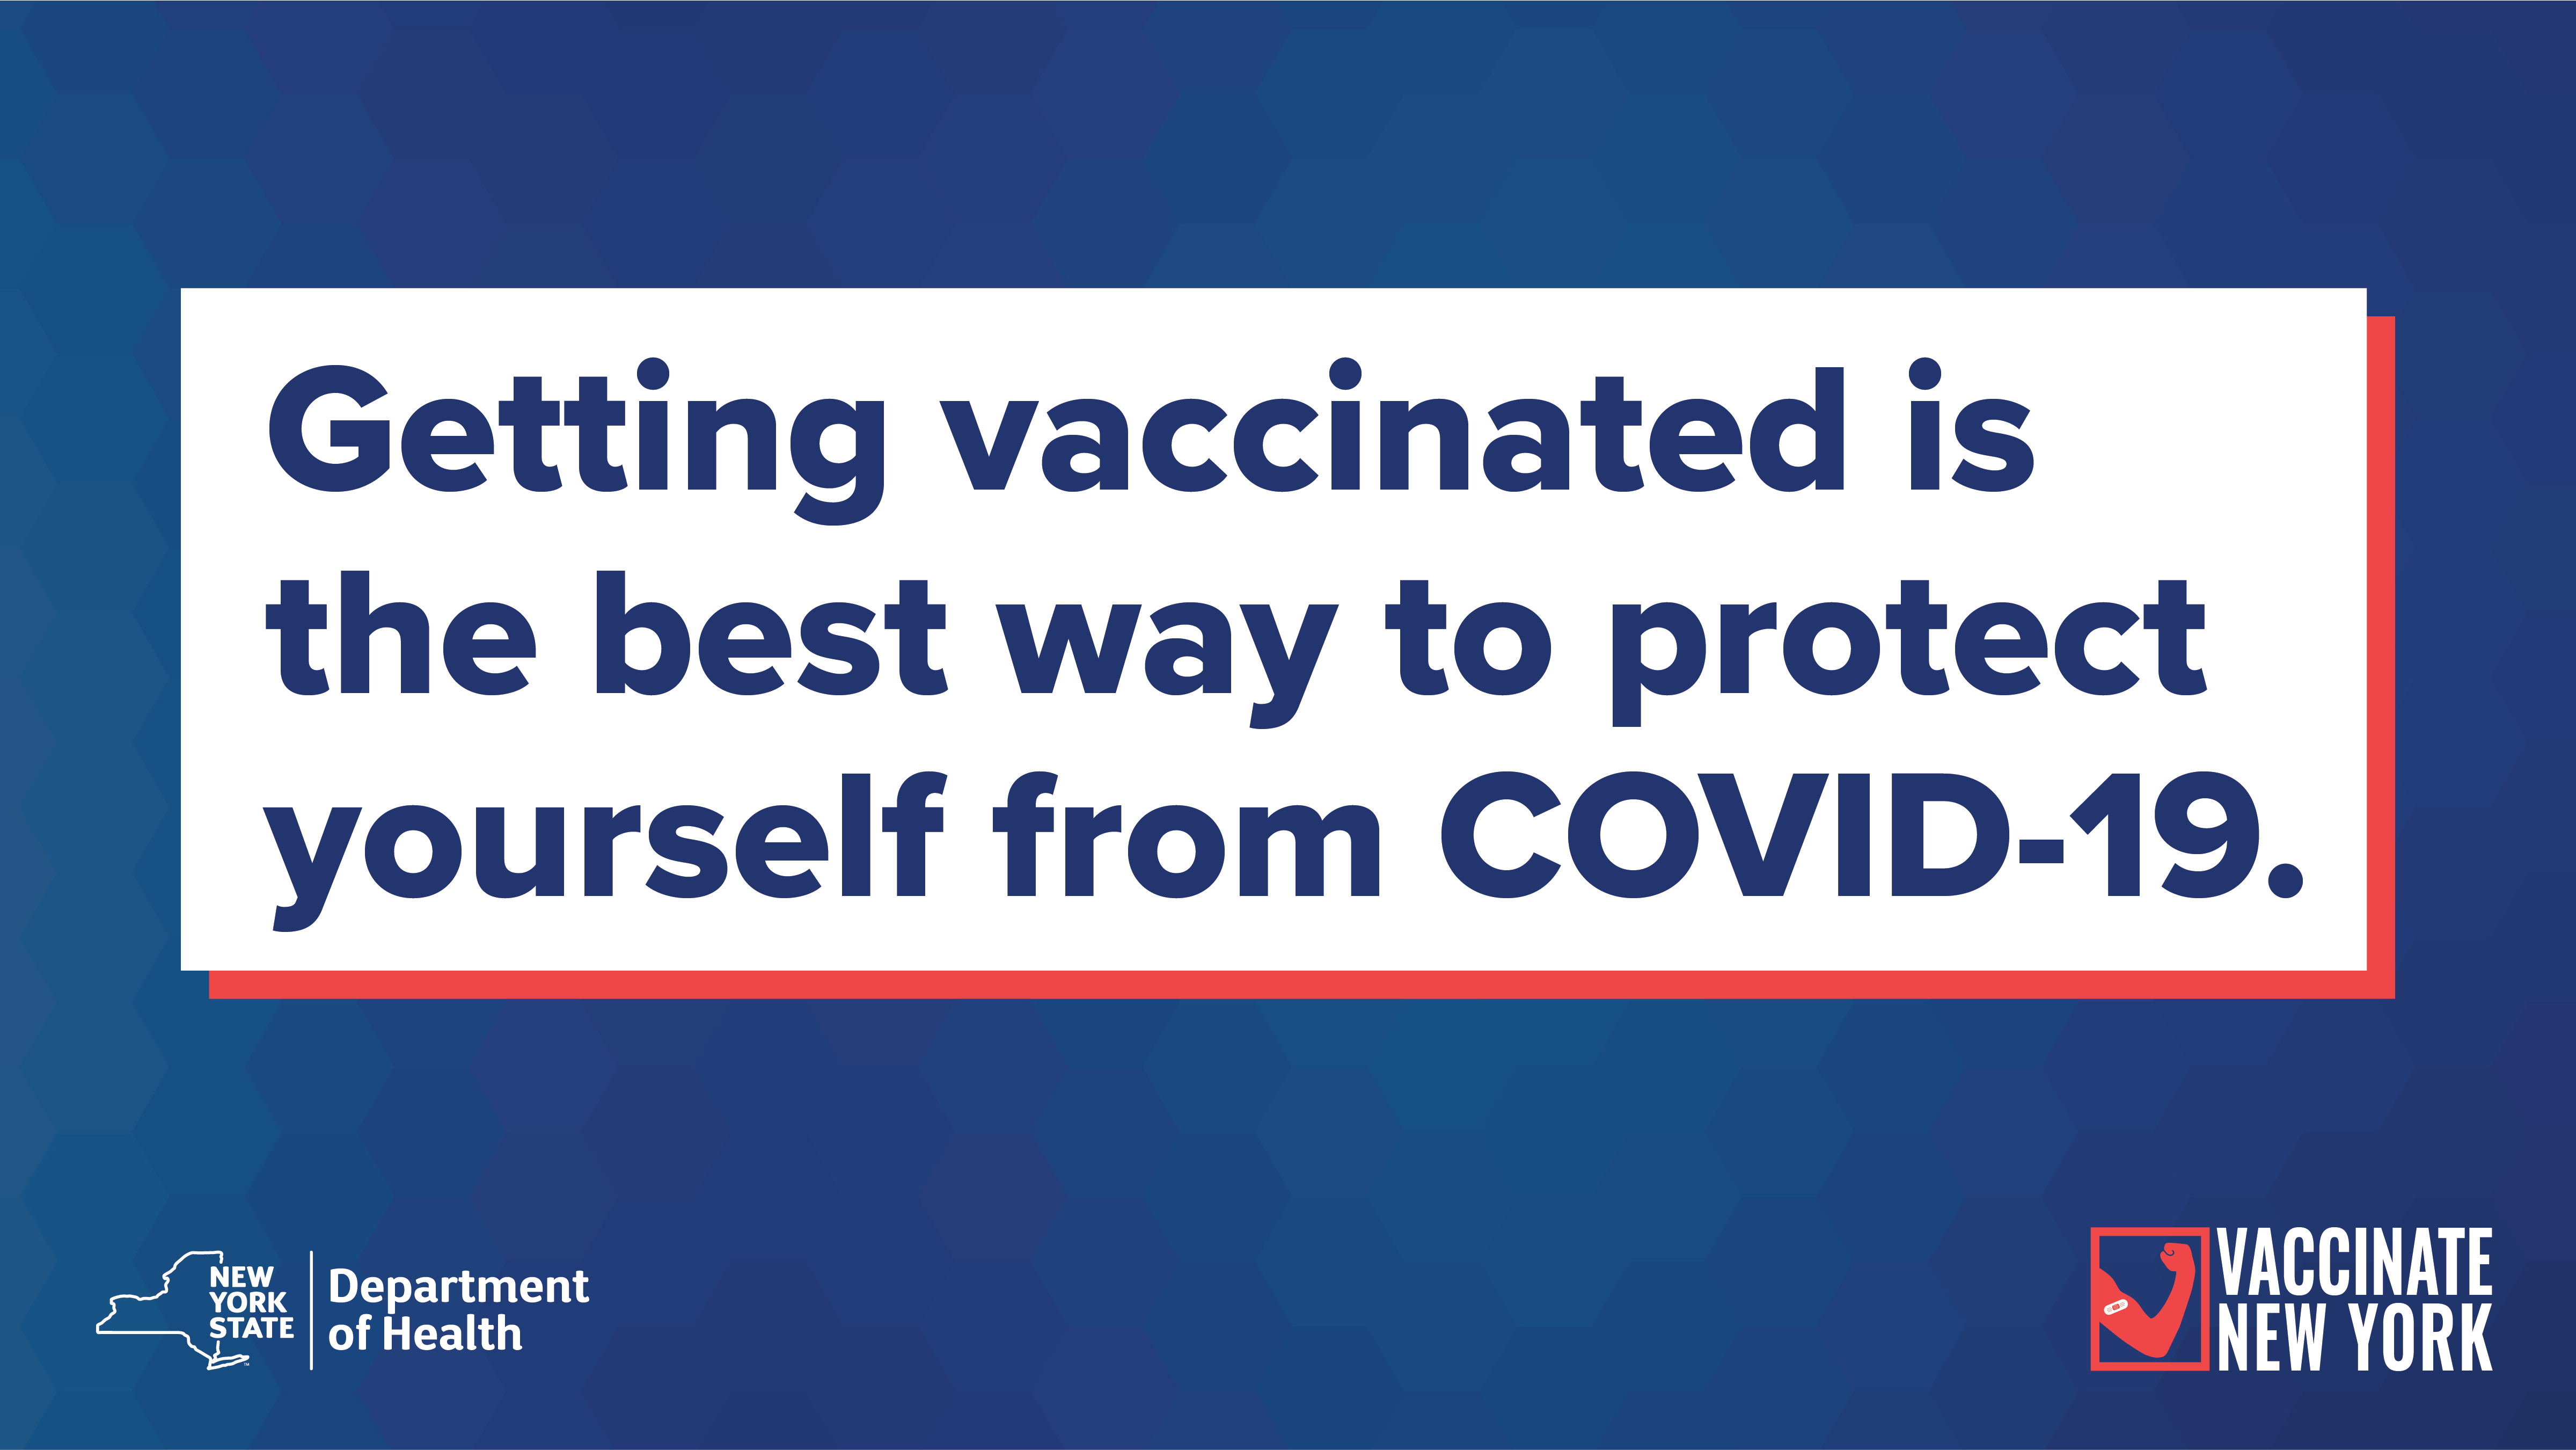 Getting the vaccine is the BEST way to protect yourself from COVID-19.